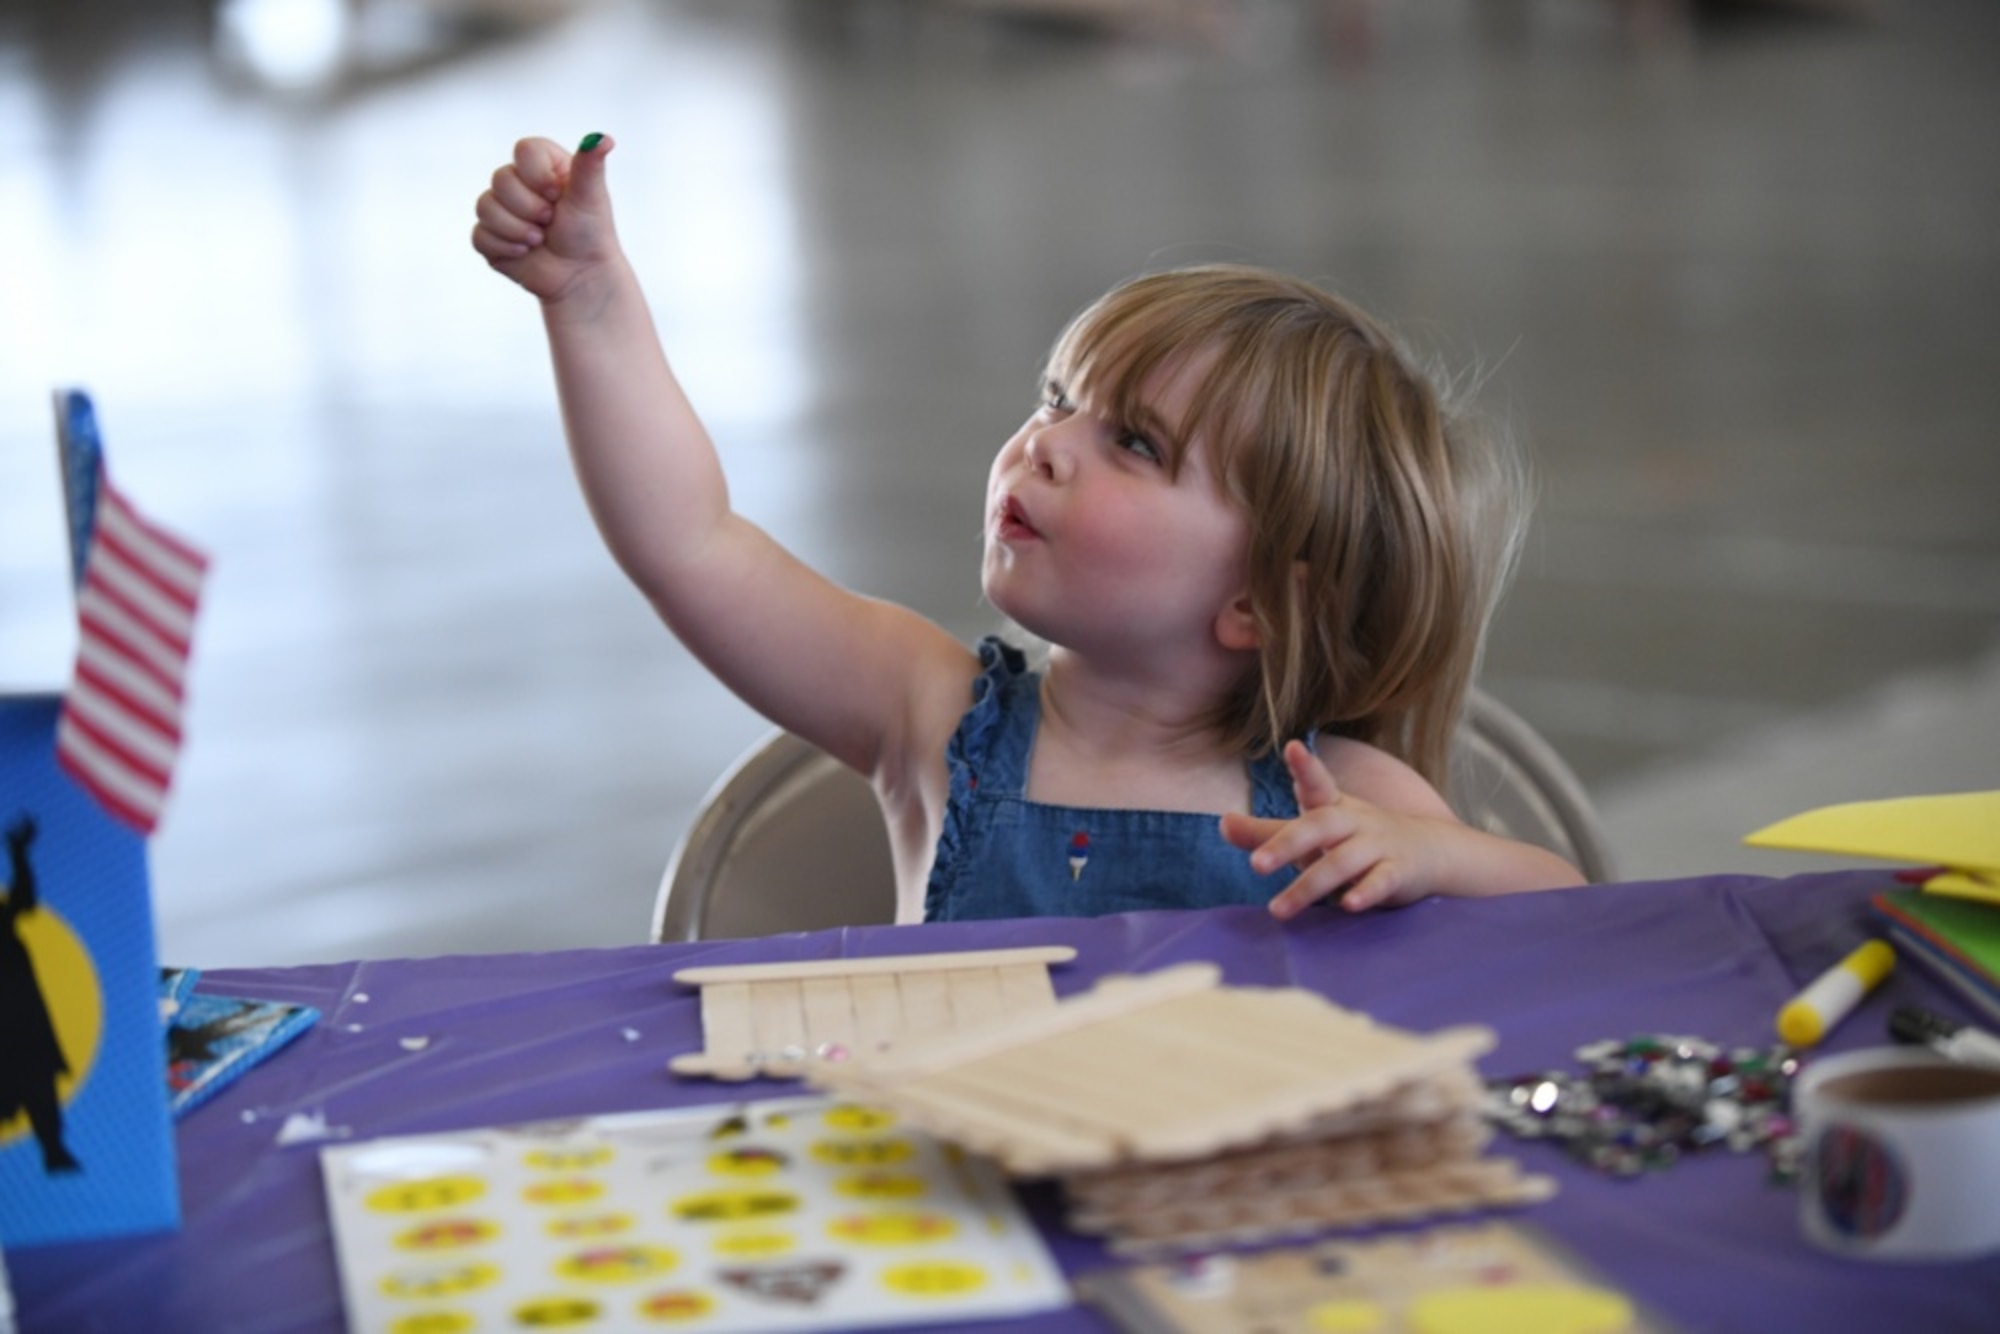 Shannon Cross, the daughter of Tech. Sgt. James Cross, a 34th Aircraft Maintenance Unit flight line expeditor, creates a picture frame at the arts and crafts table, during the Back to School Roundup held at the Pride Hangar on Ellsworth Air Force Base, S.D., Aug. 18, 2019. April has been designated as the Month of the Military Child. It is set aside to honor the strength and sacrifices of military children across all branches. (U.S. Air Force photo by Airman 1st Class Christina Bennett)